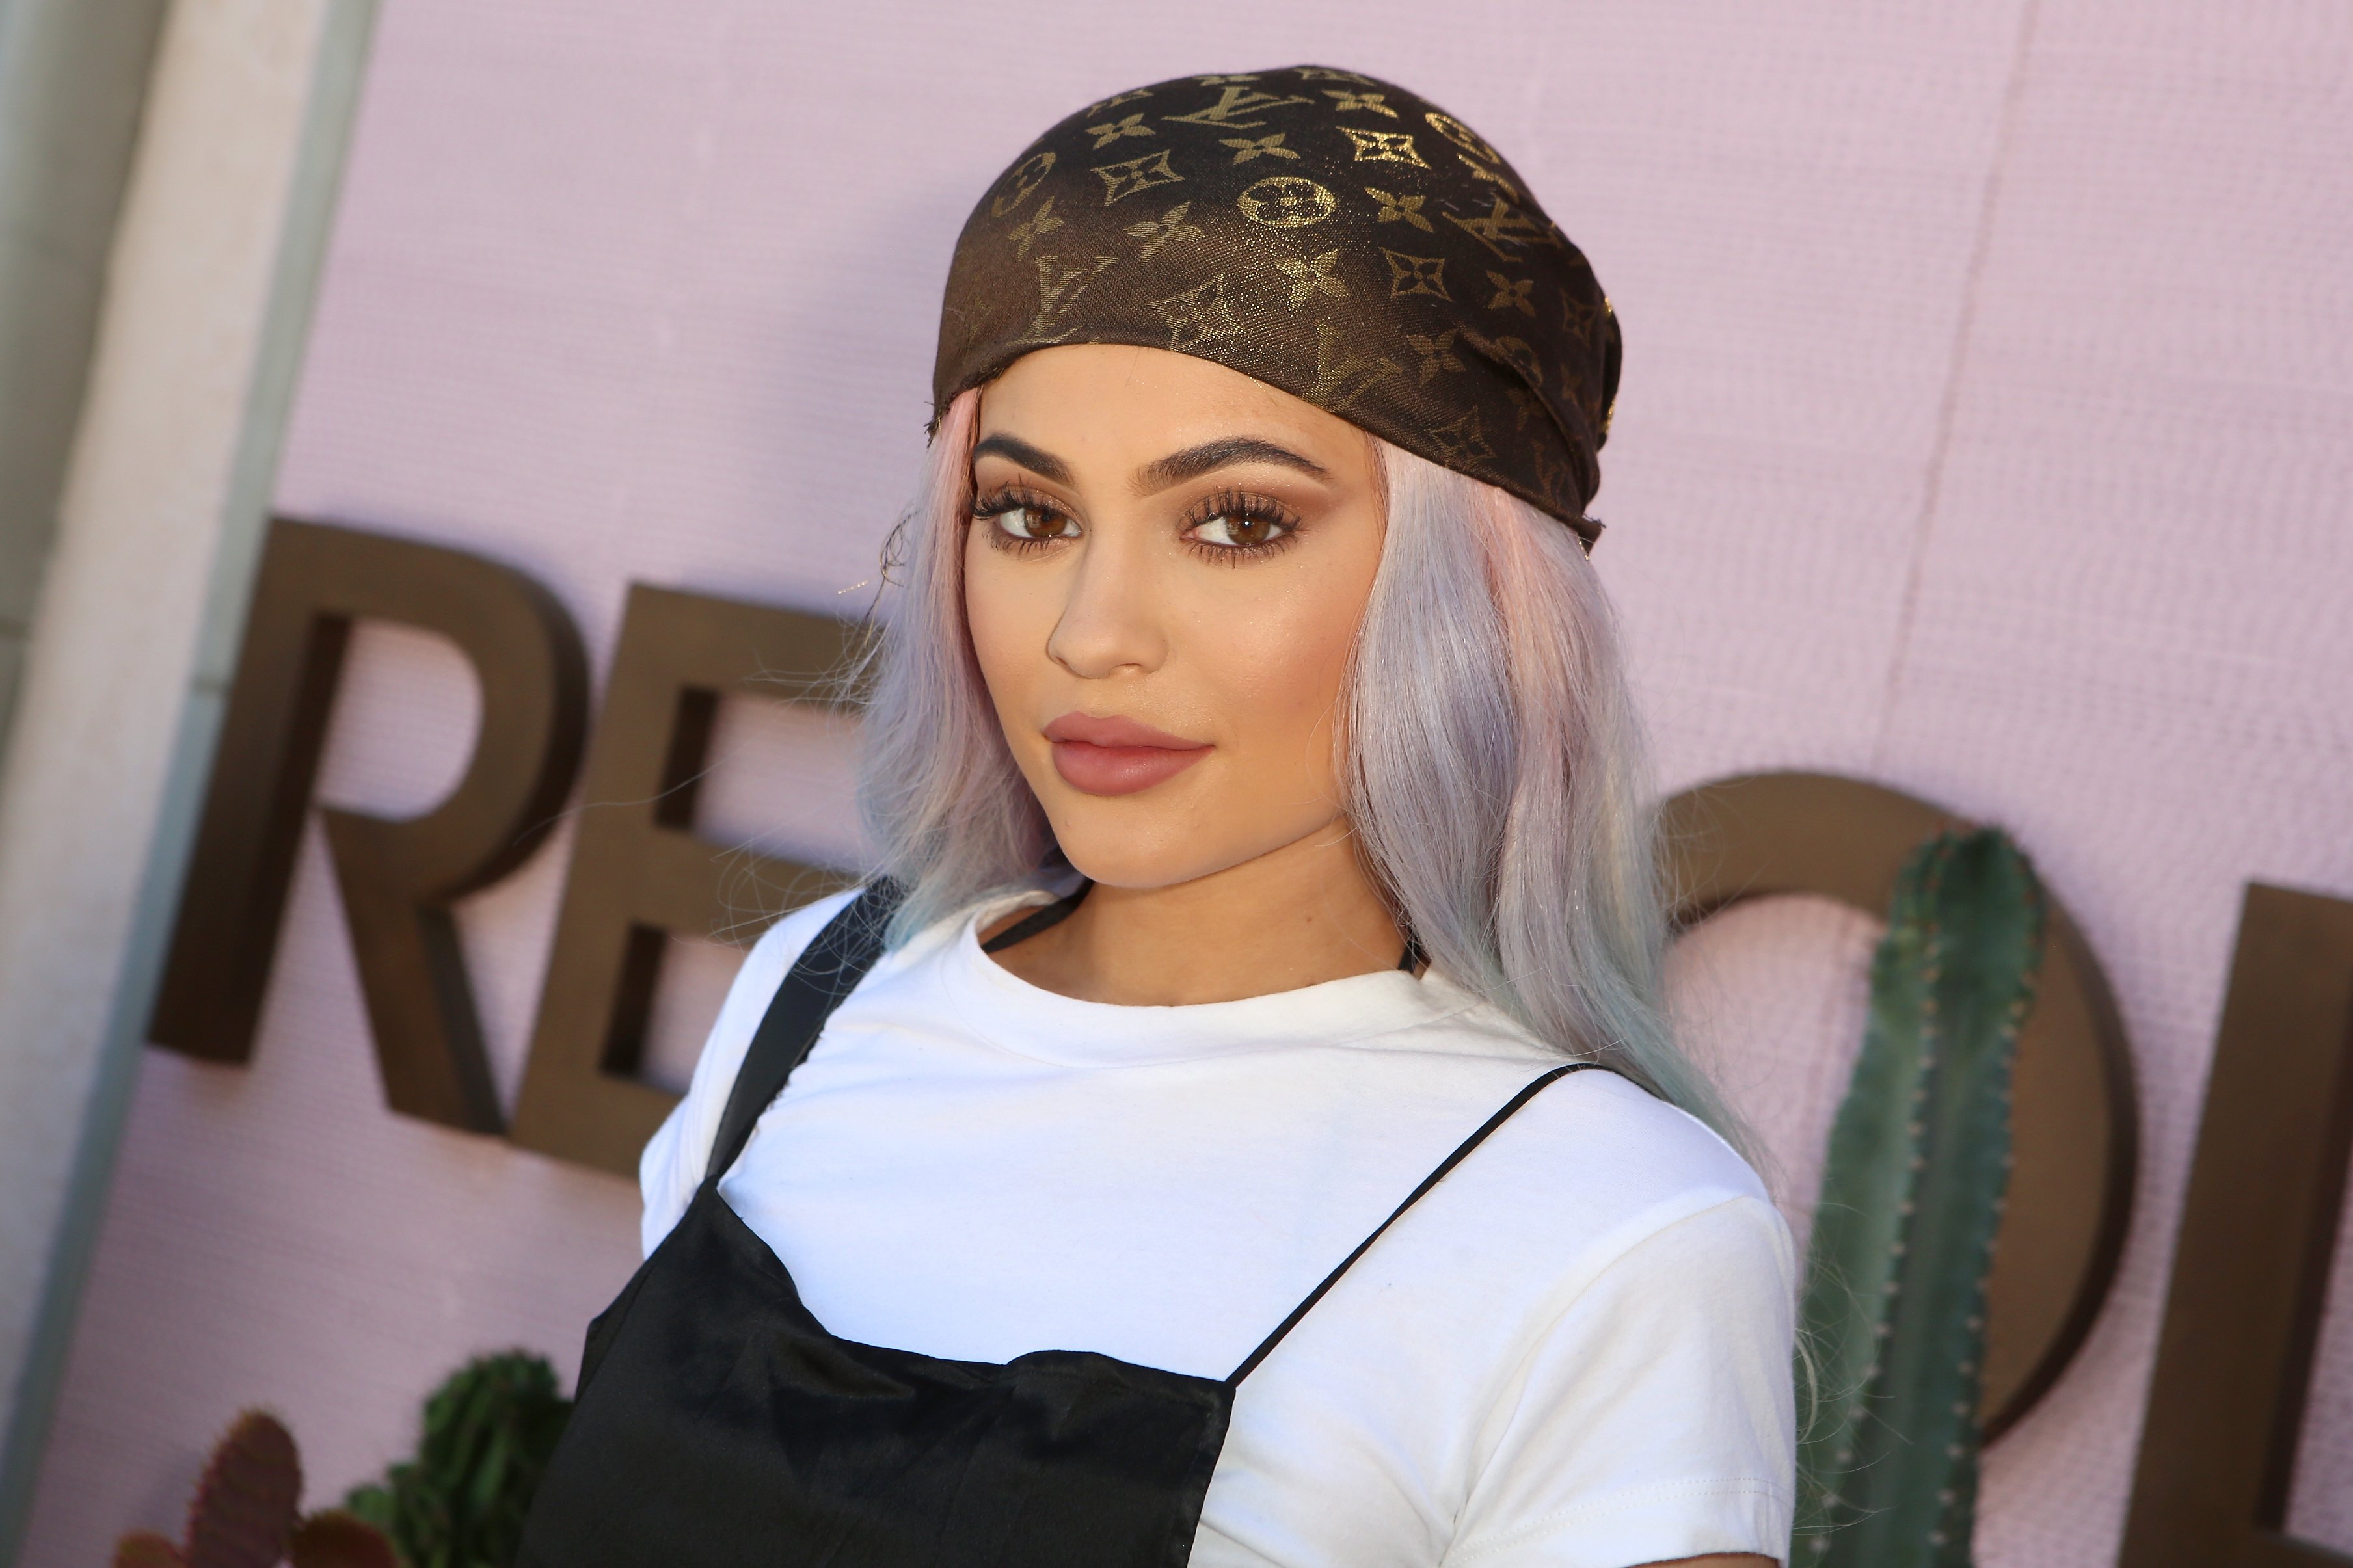  Kylie Jenner at REVOLVE's Desert House on April 17, 2016 in California | Photo: Getty Images